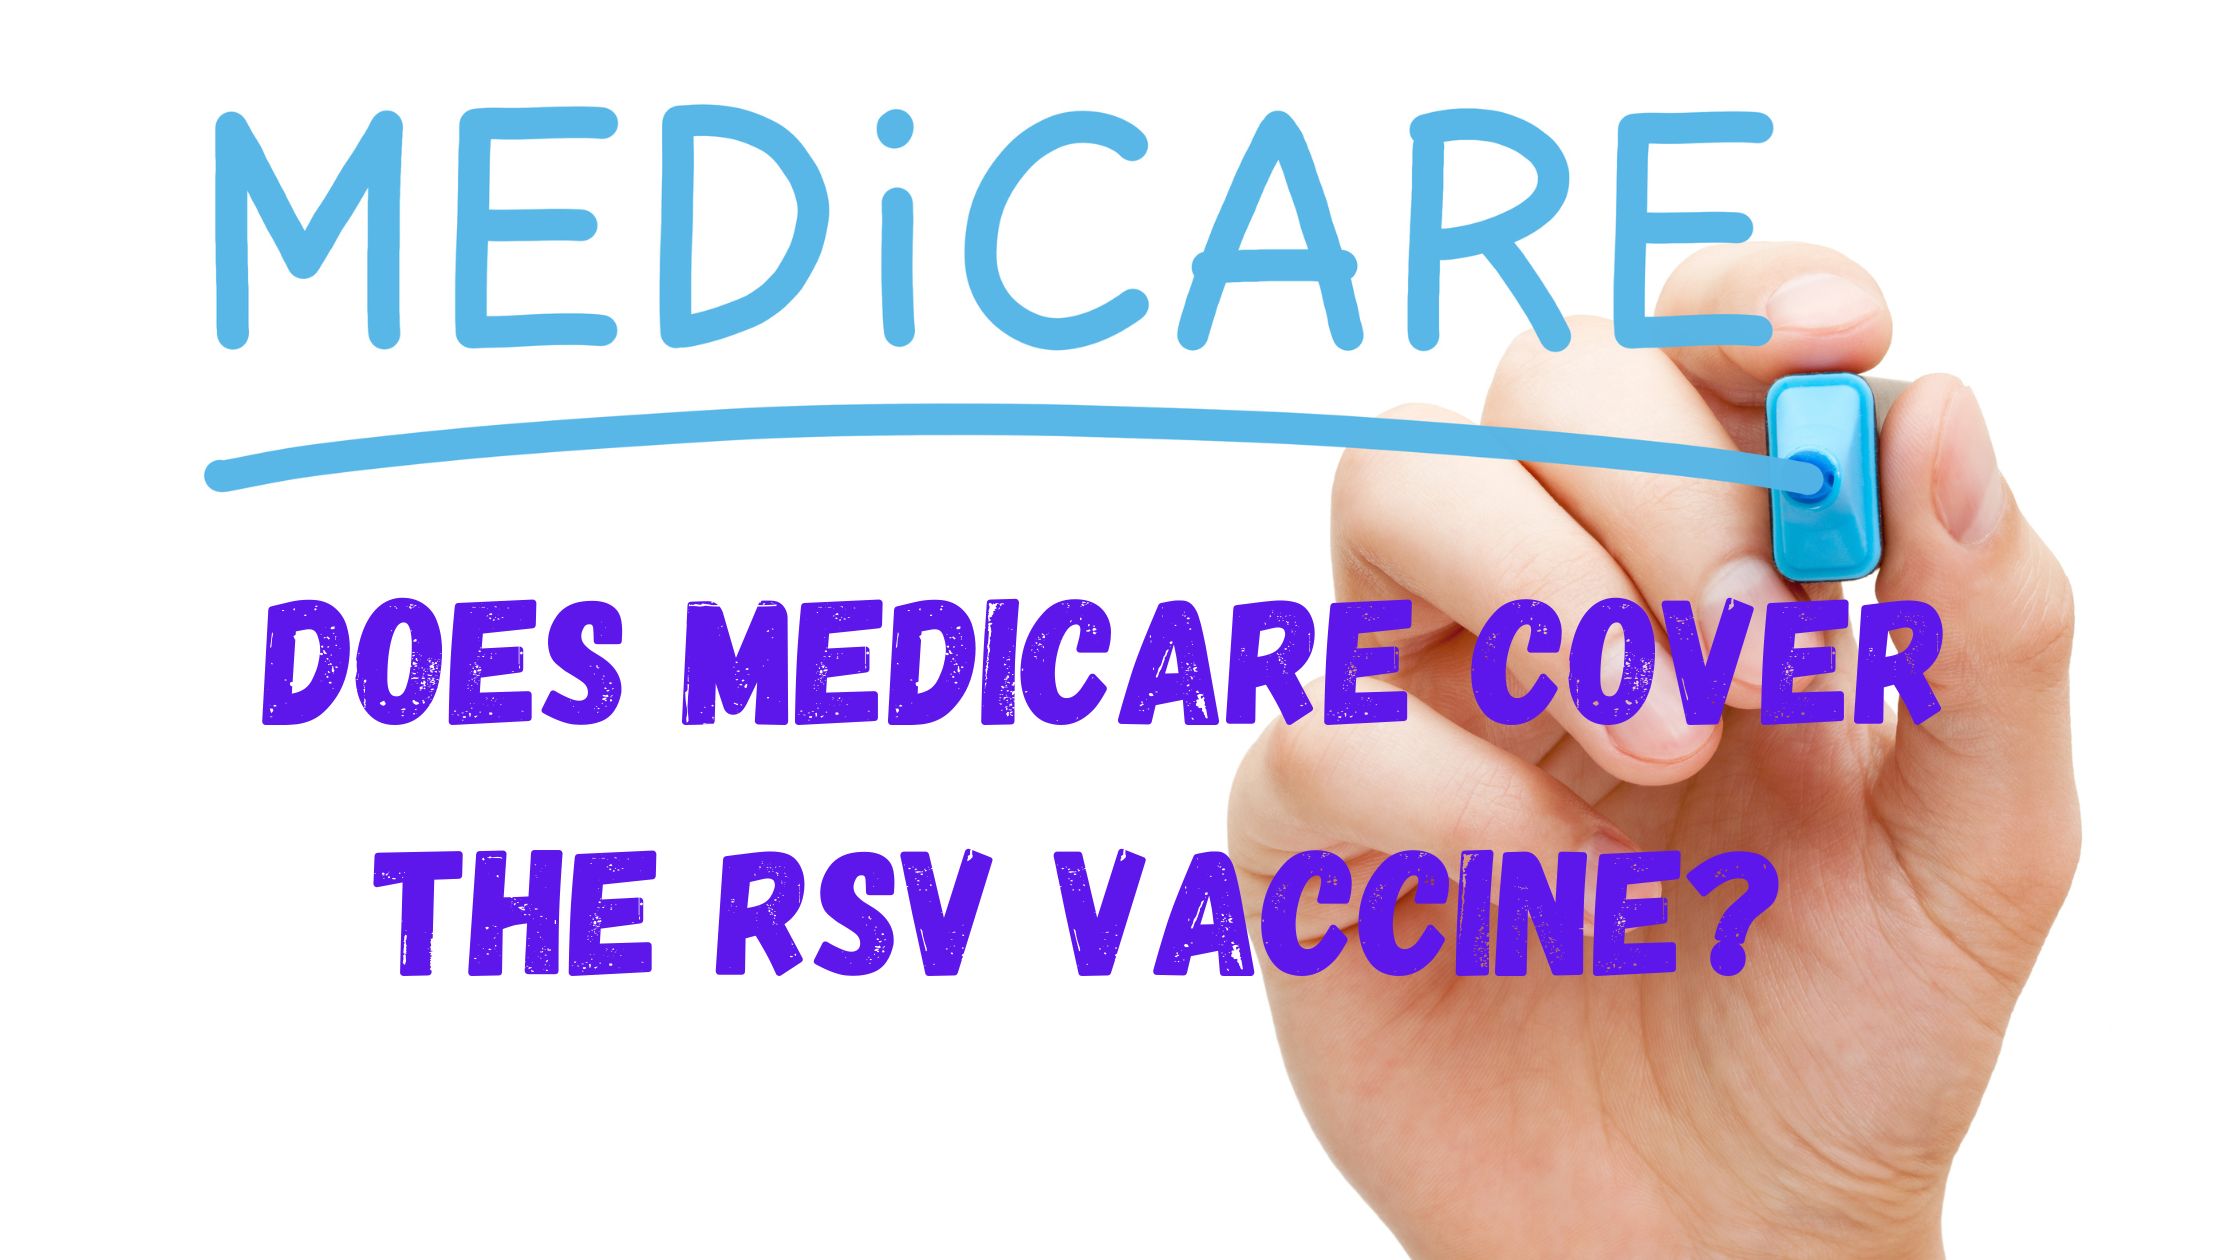 Does Medicare cover the RSV vaccine